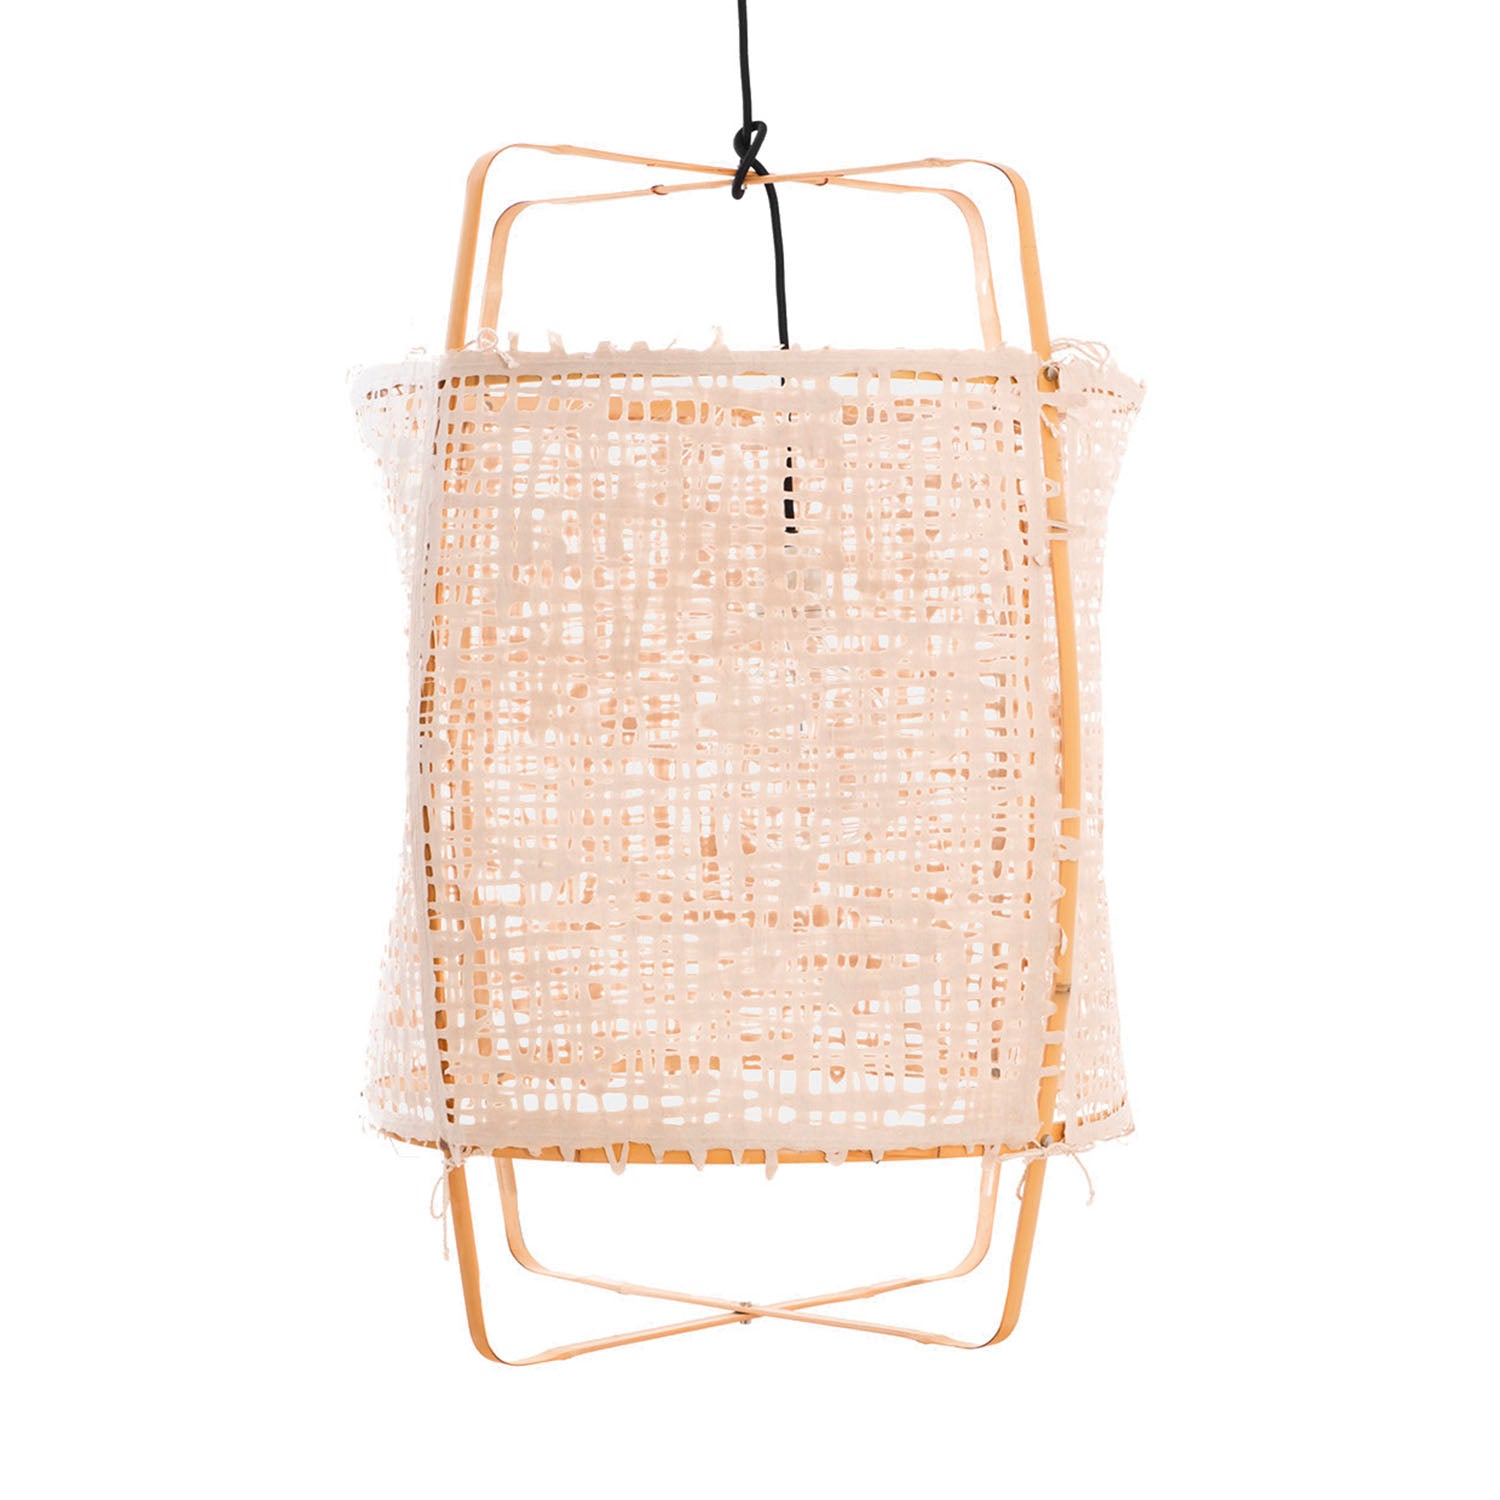 Z22 - Cage pendant light in light bamboo and white or black silk